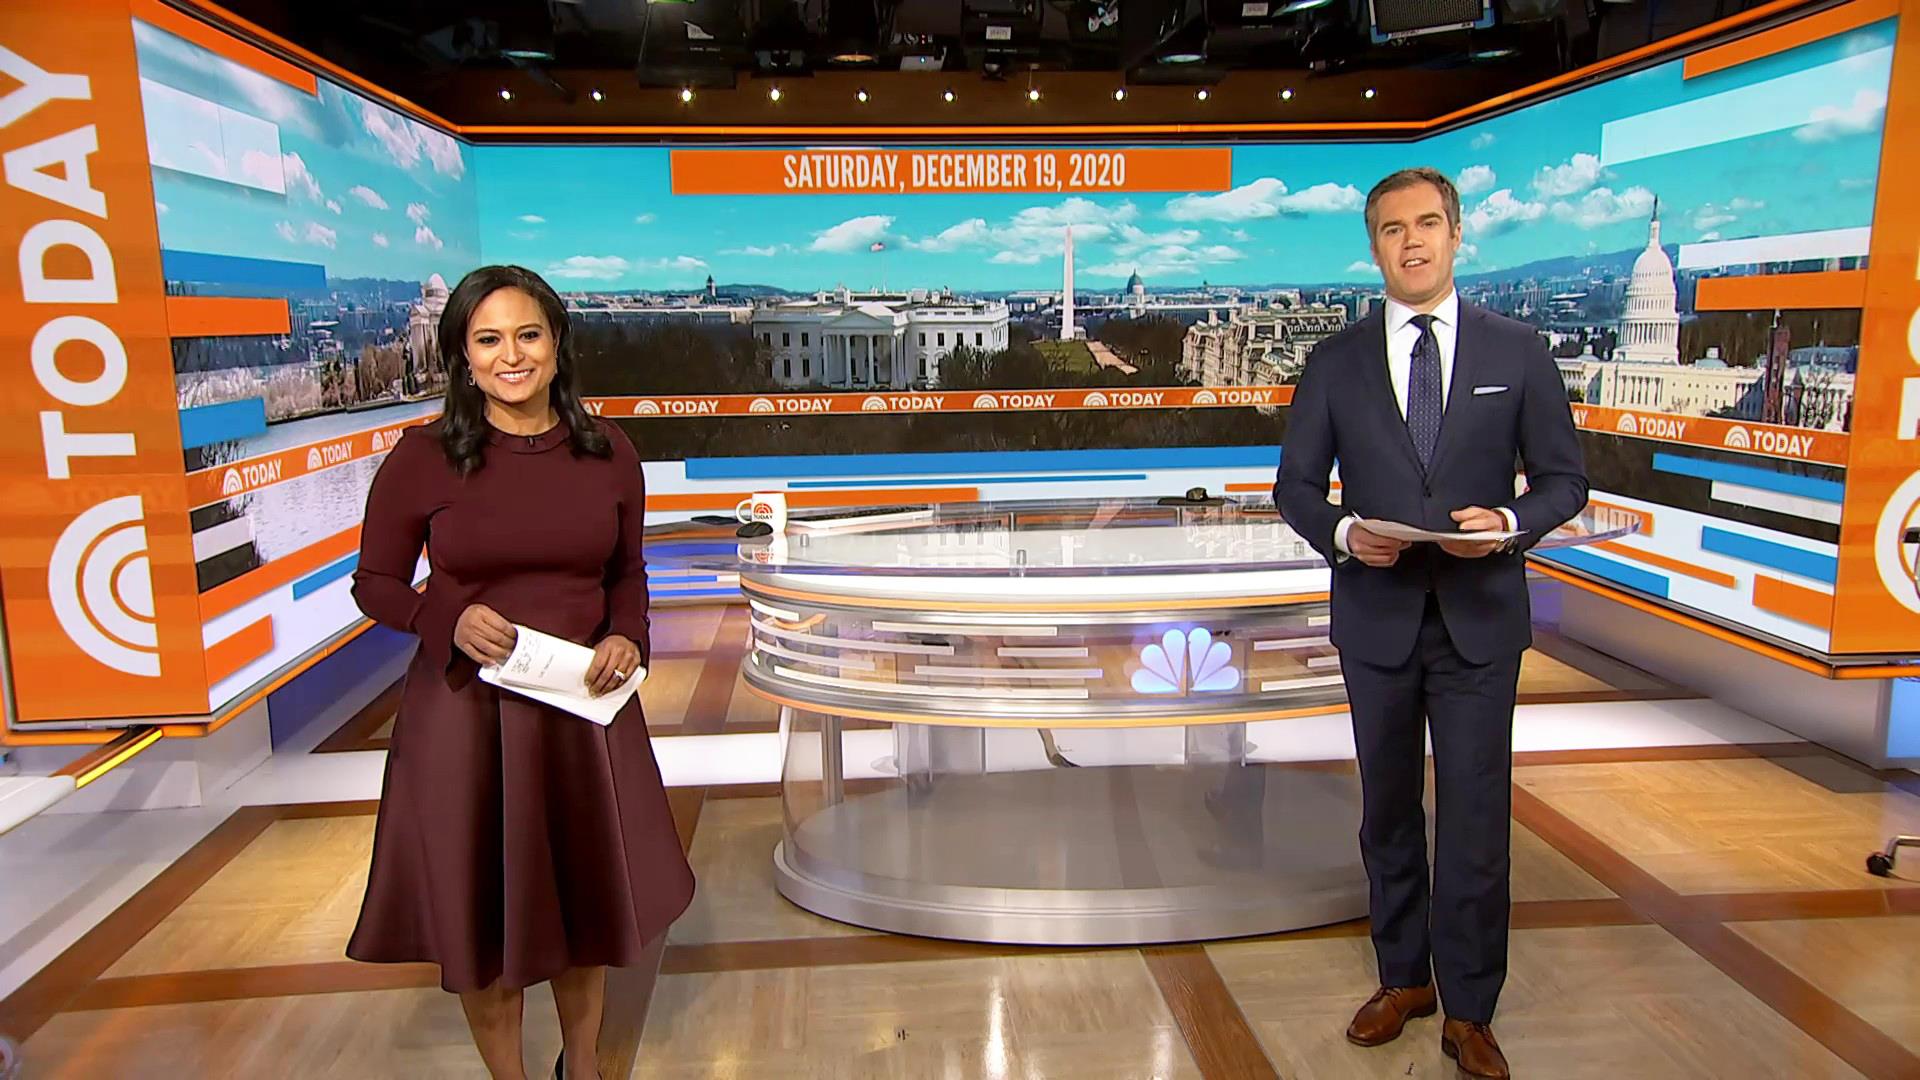 Weekend TODAY moves into new NBC studio in Washington, DC